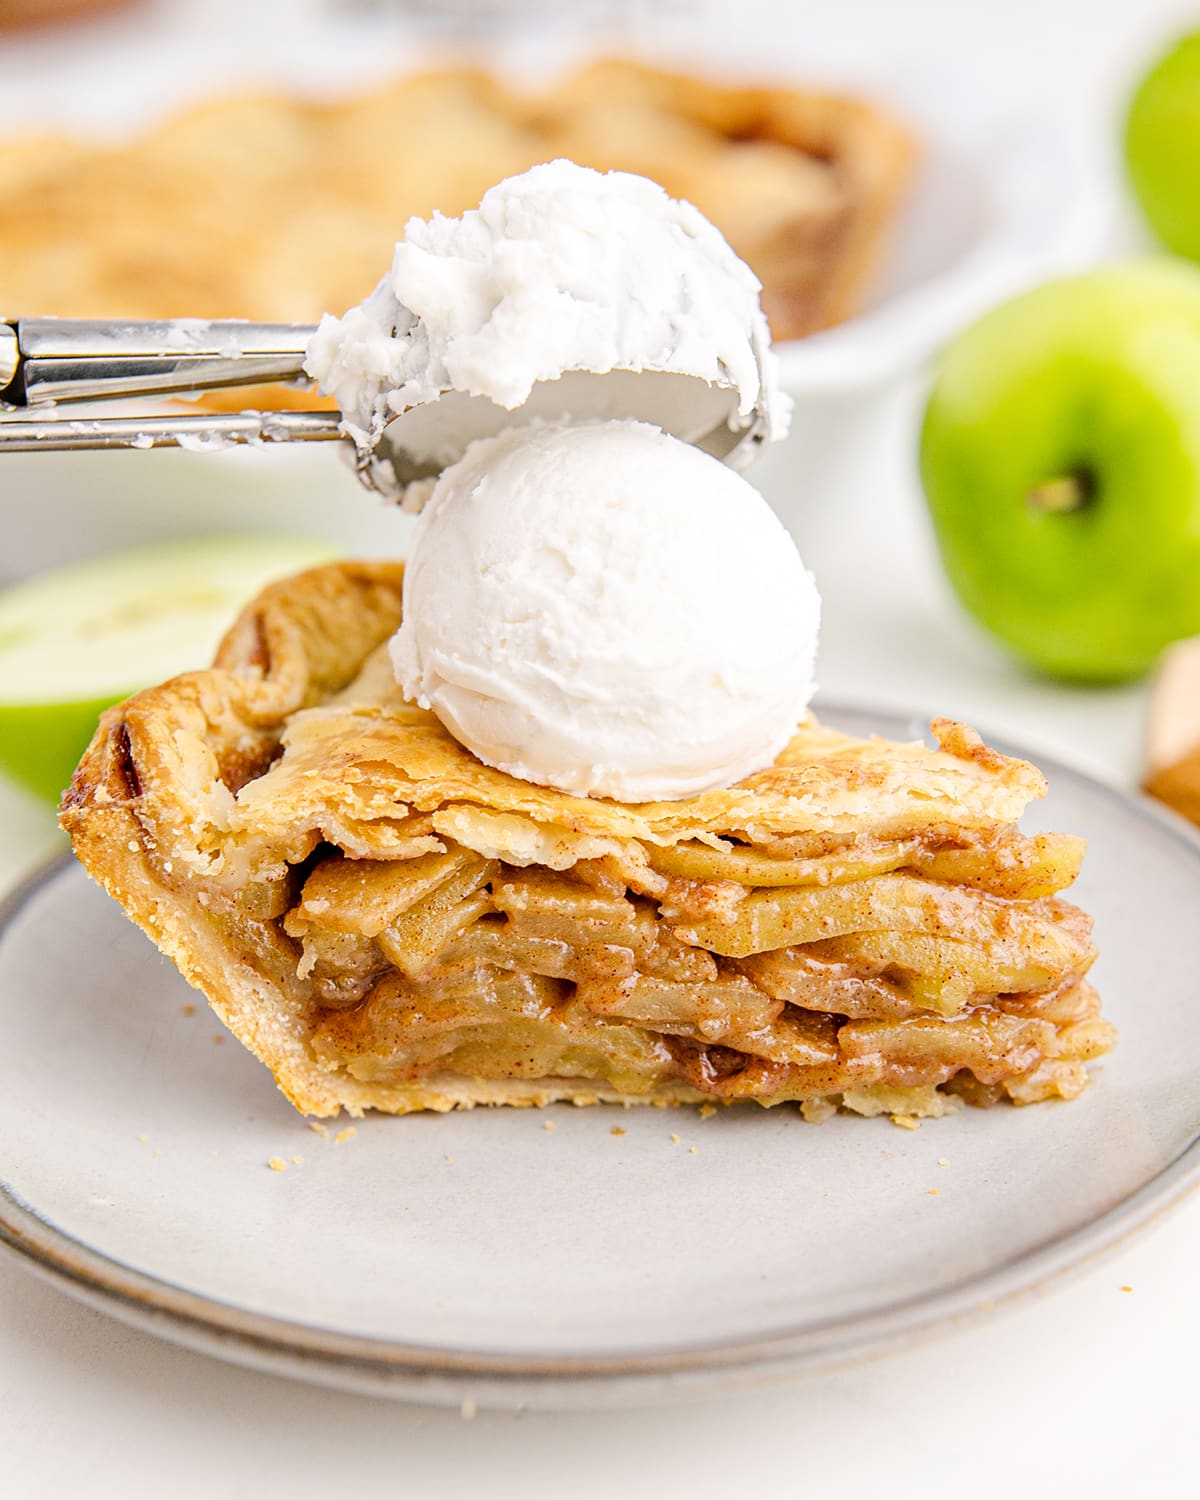 A piece of apple pie on a plate topped with a scoop of ice cream coming out of the ice cream scooper.